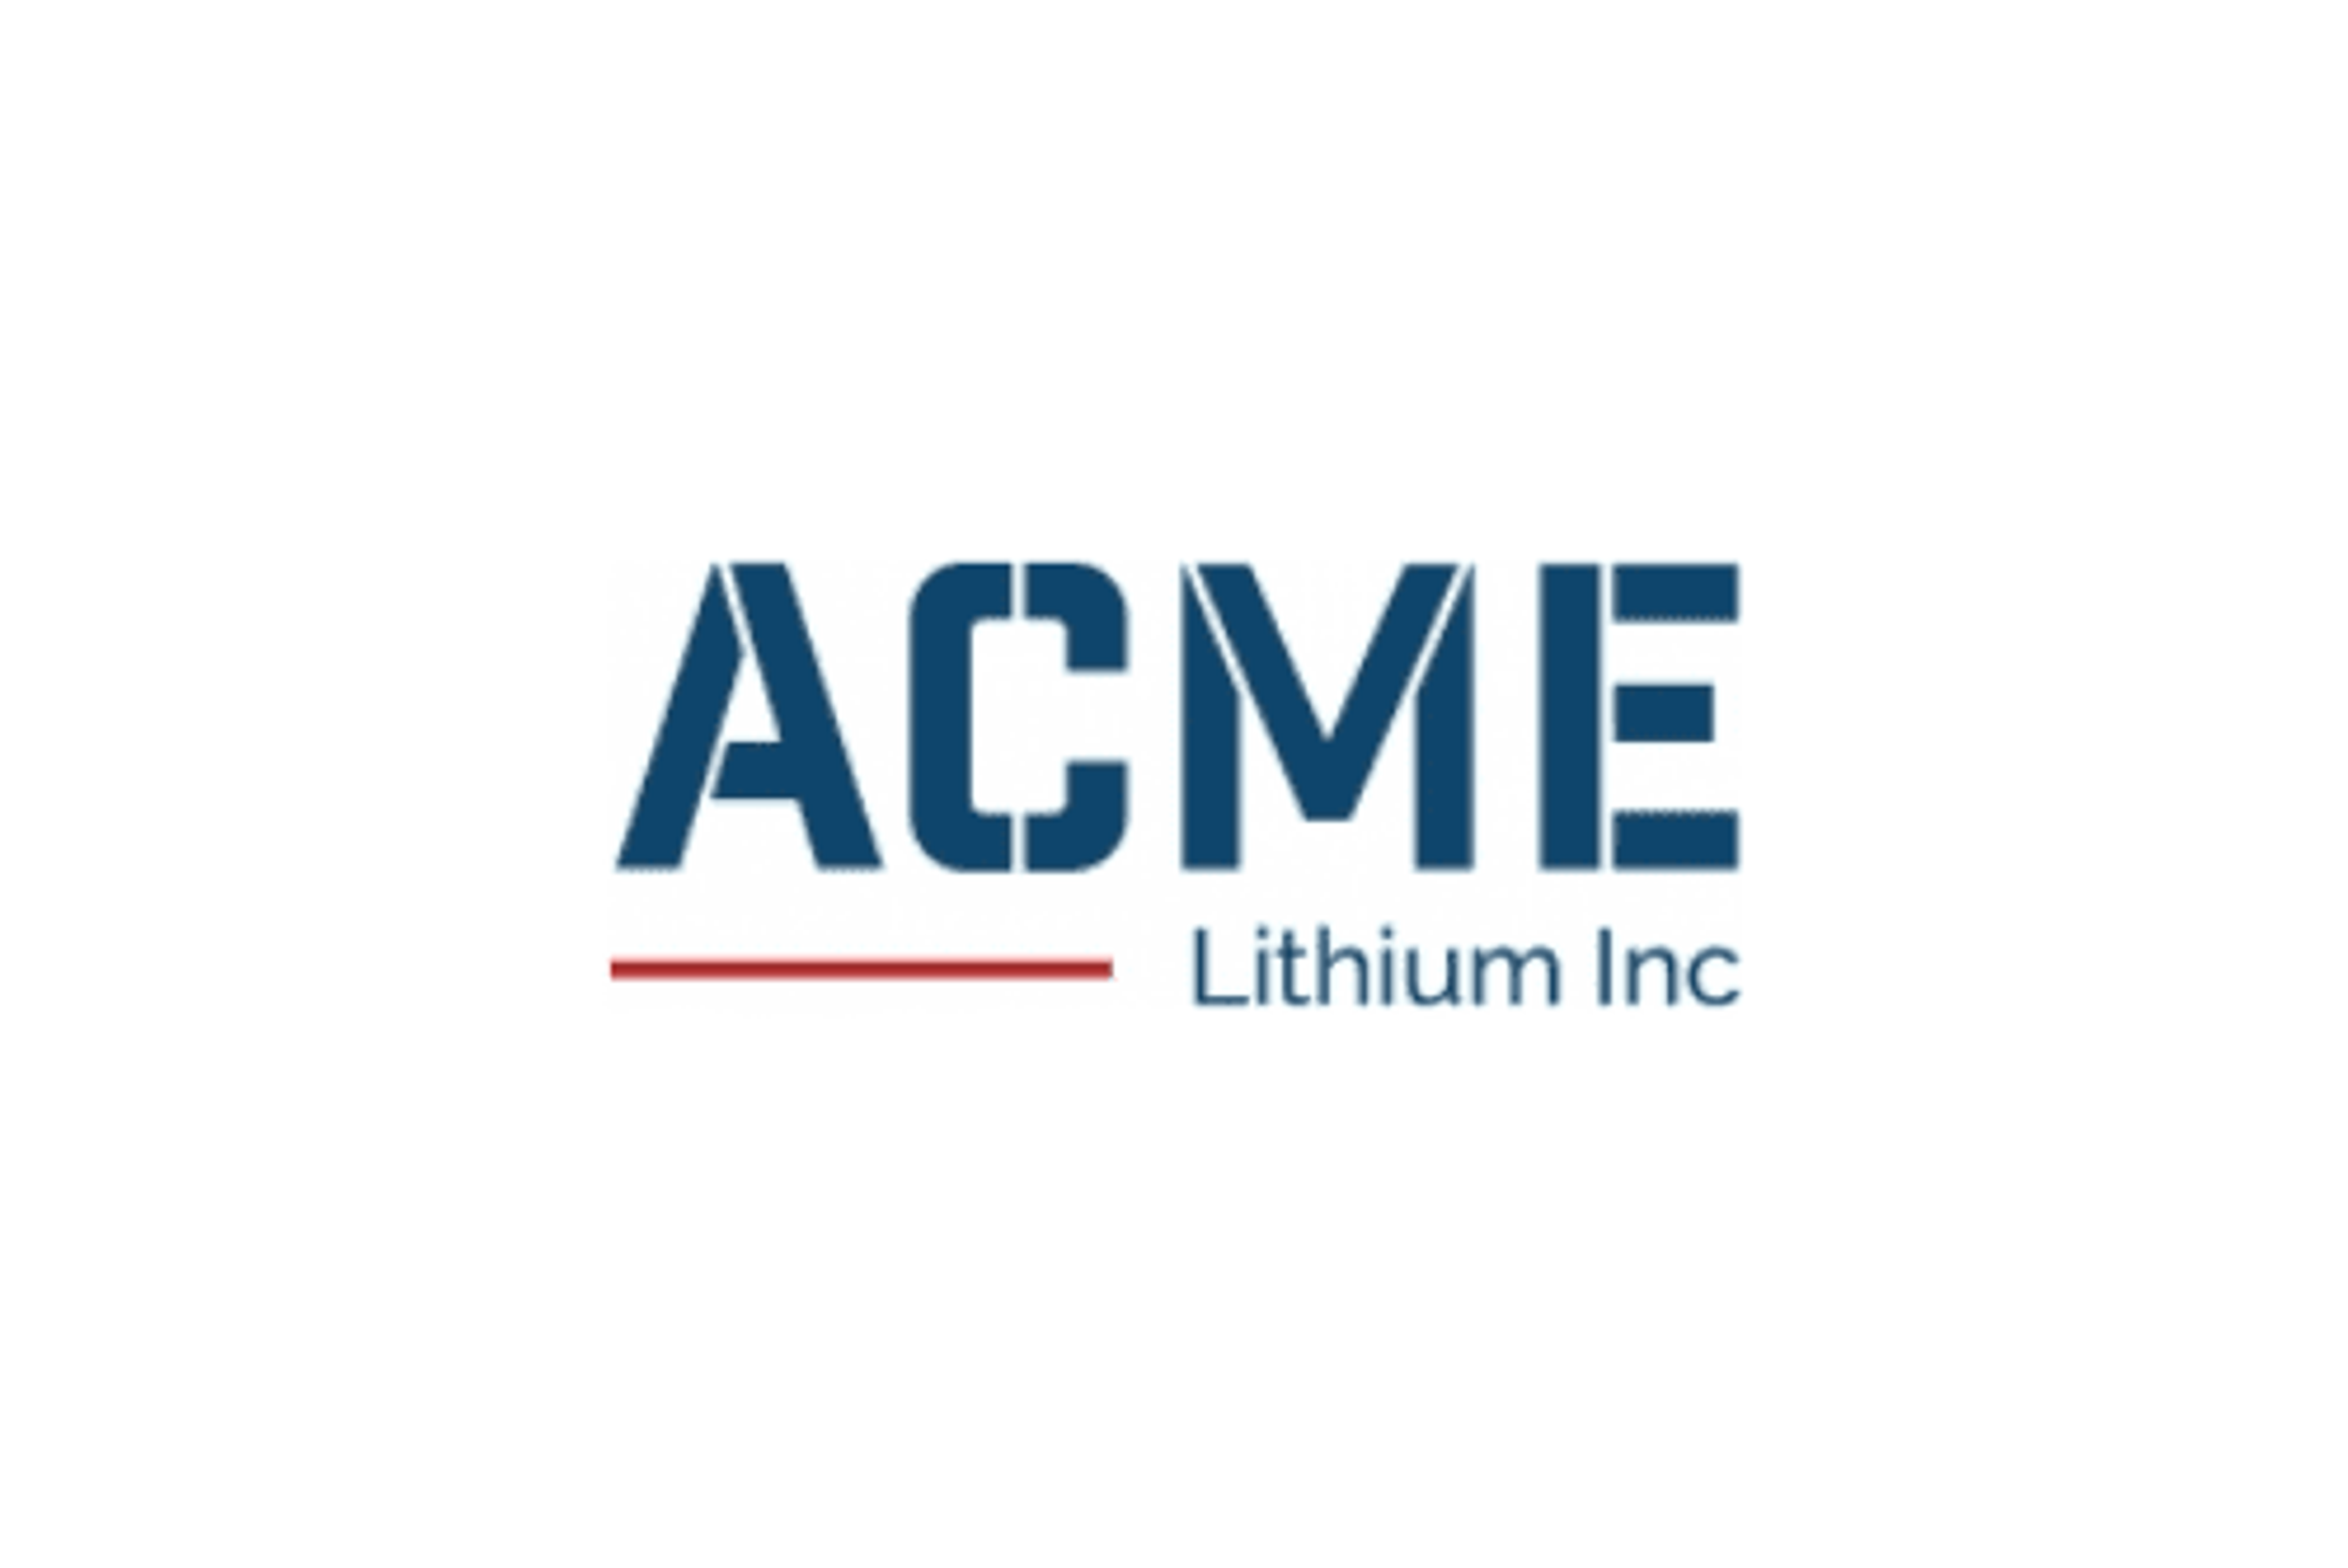 ACME Lithium to Present at Mines and Money Conference London and Engages Red Cloud for Advisory Services